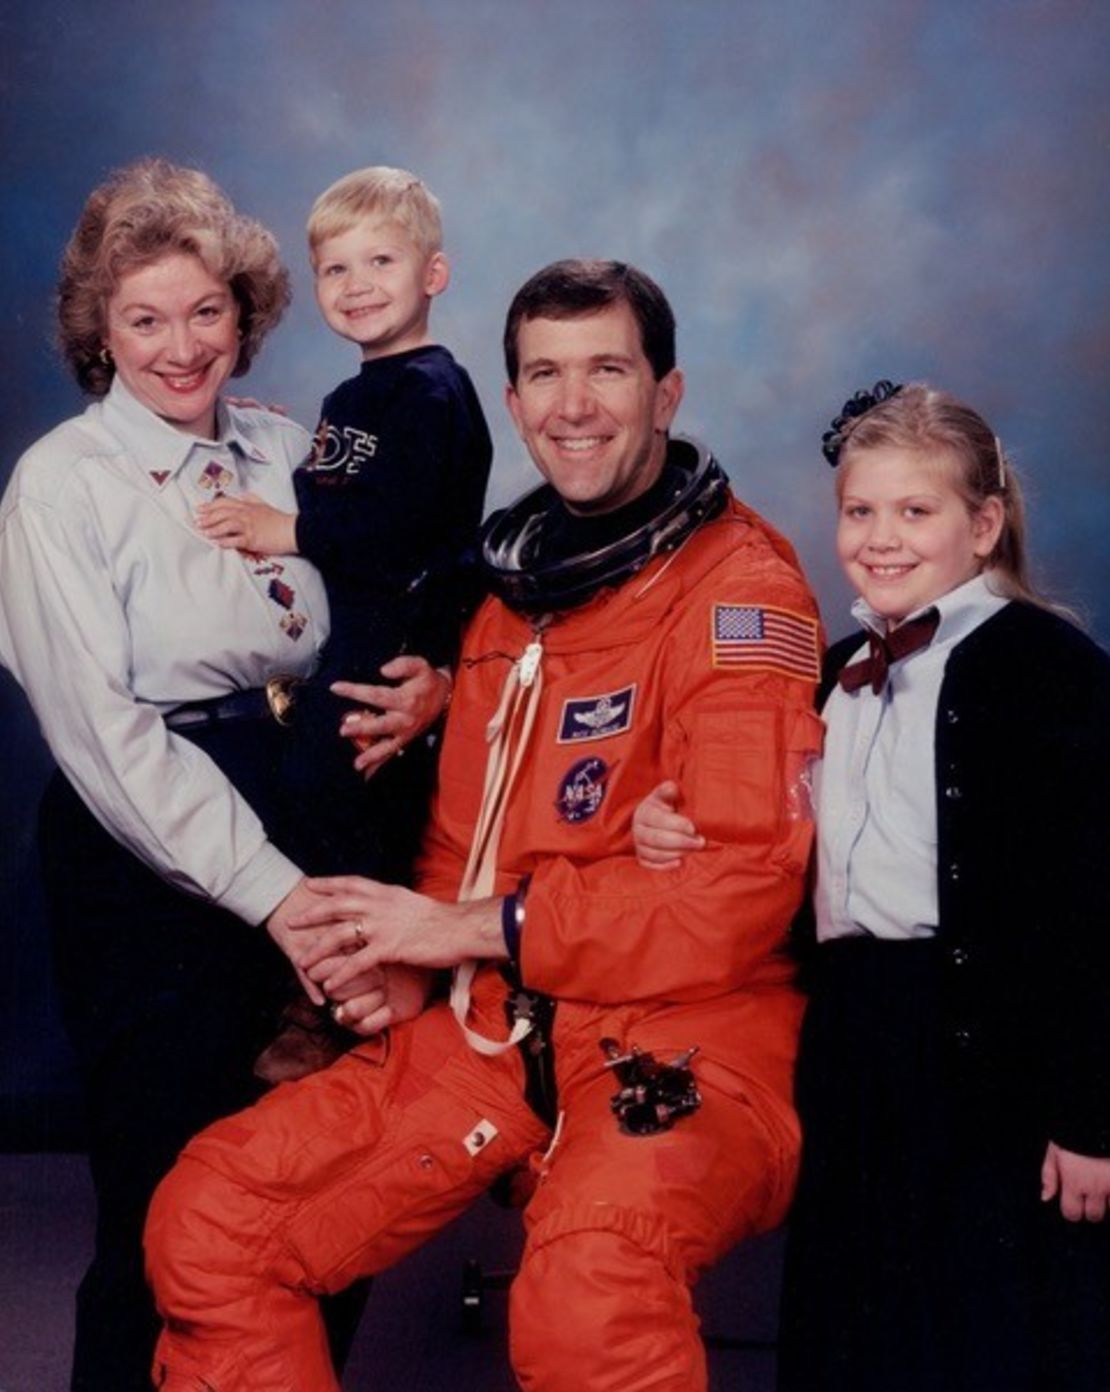 Evelyn Husband and her spouse, NASA astronaut Rick Husband, are seen with their children, Matthew and Laura.